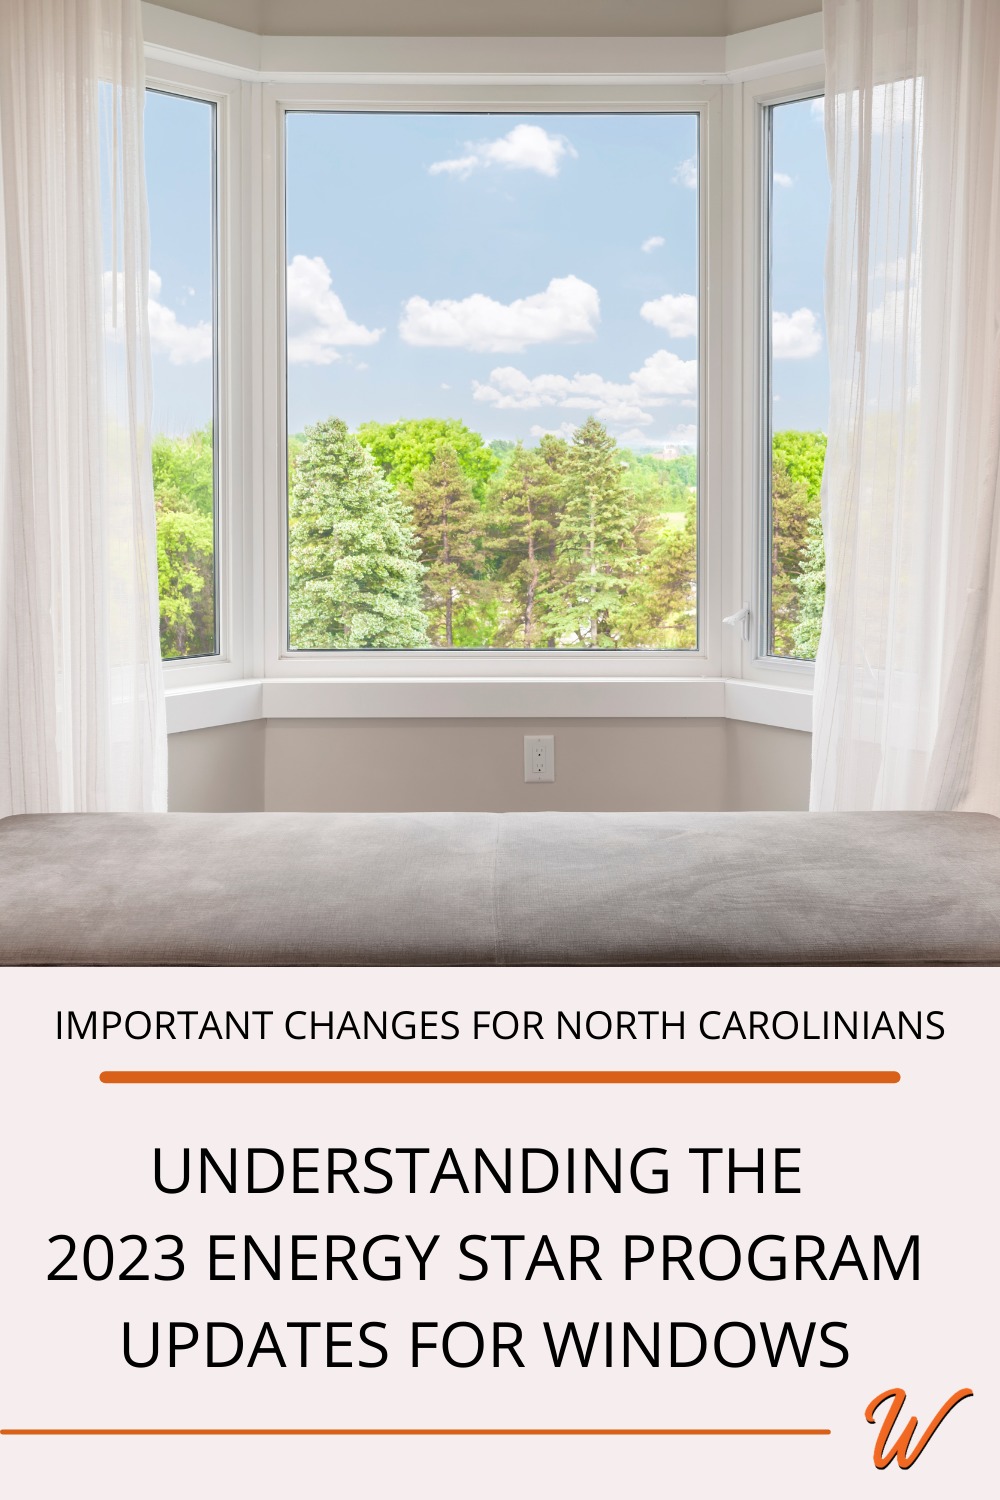 a bay window in a bedroom overlooking a forest captioned with: Important changes for North Carolinians: Understanding the 2023 Energy Star Program updates for windows.